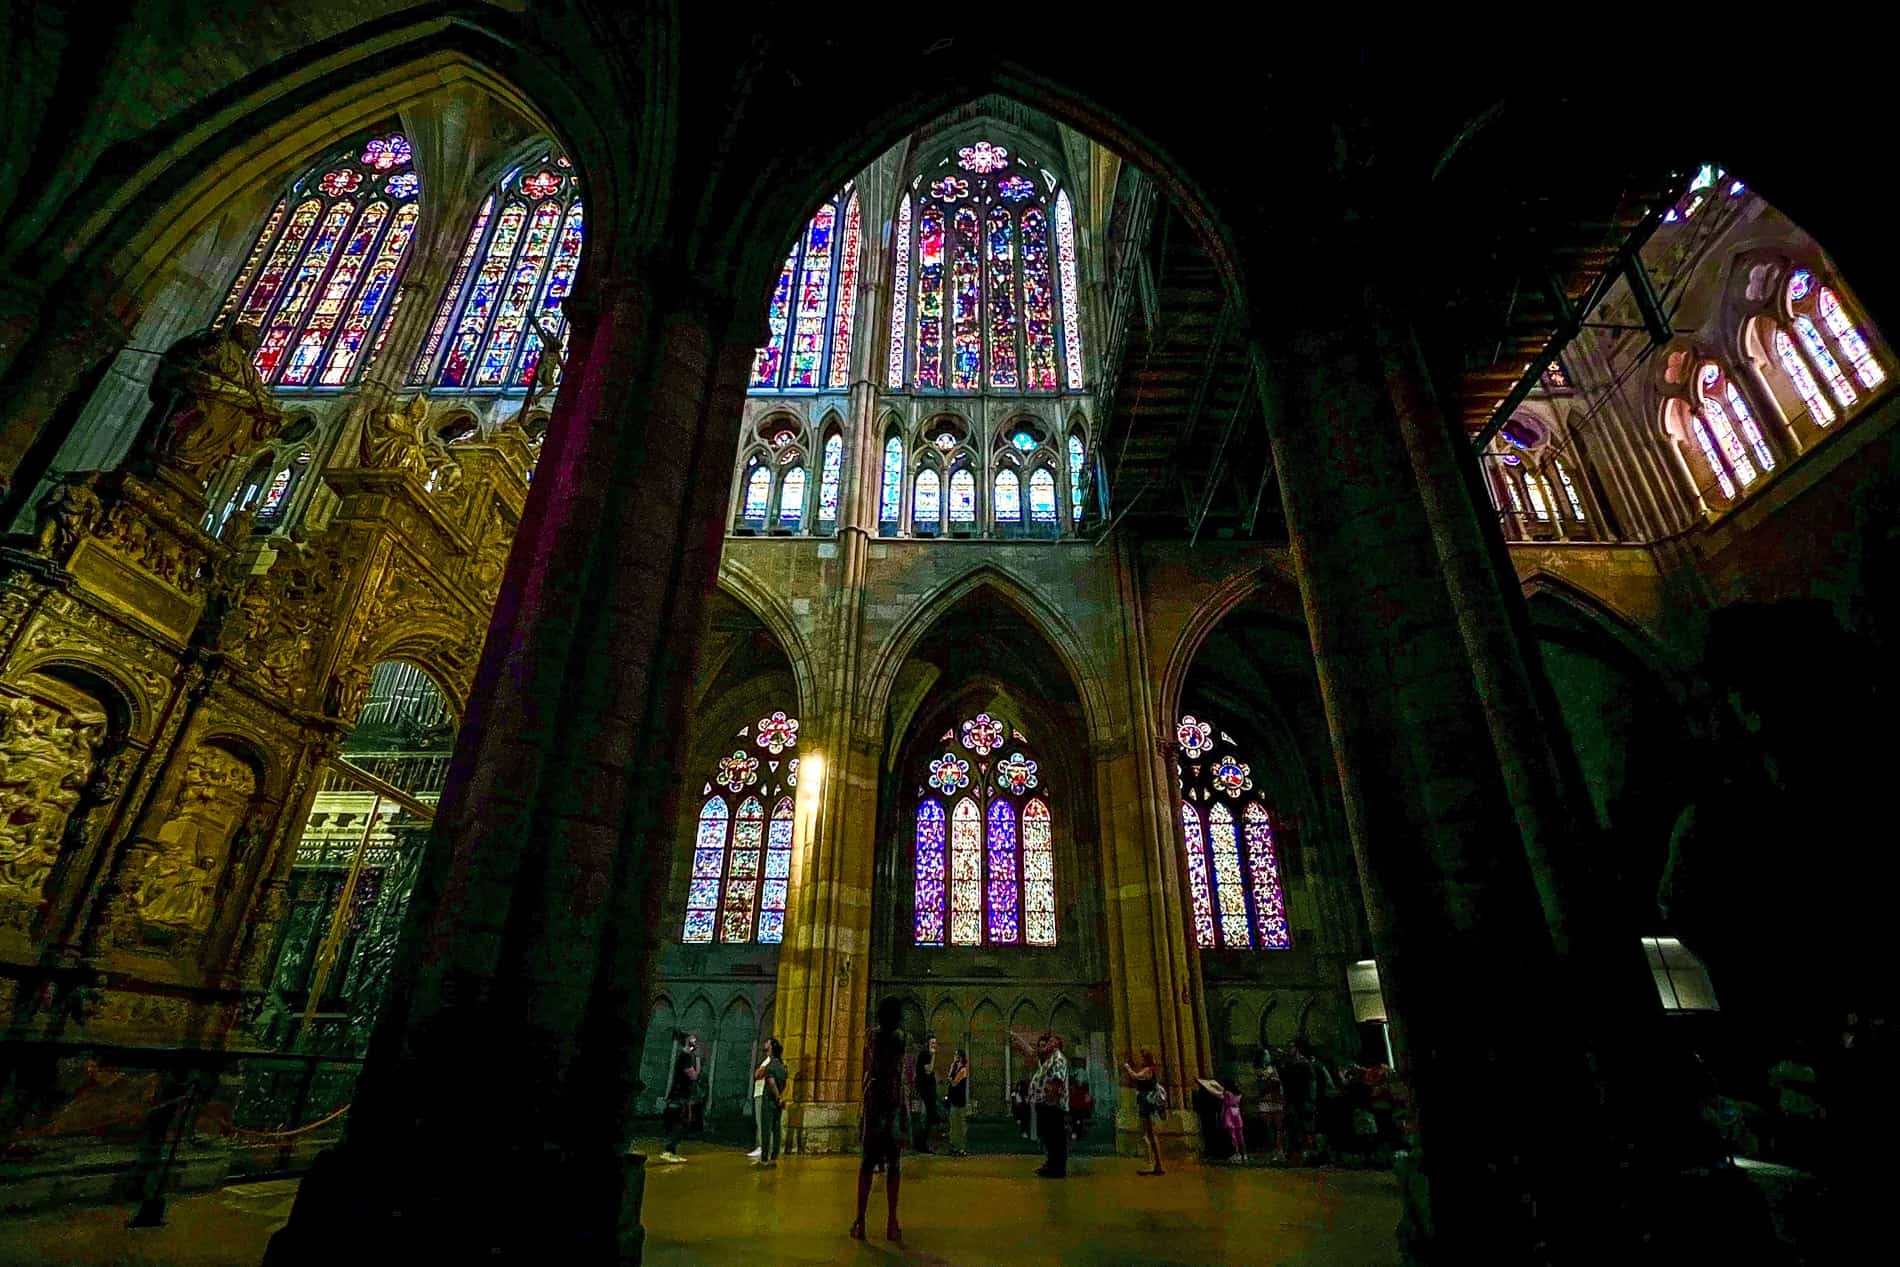 A view from behind an arcade archway of the multicoloured stained glass windows of León Cathedral.